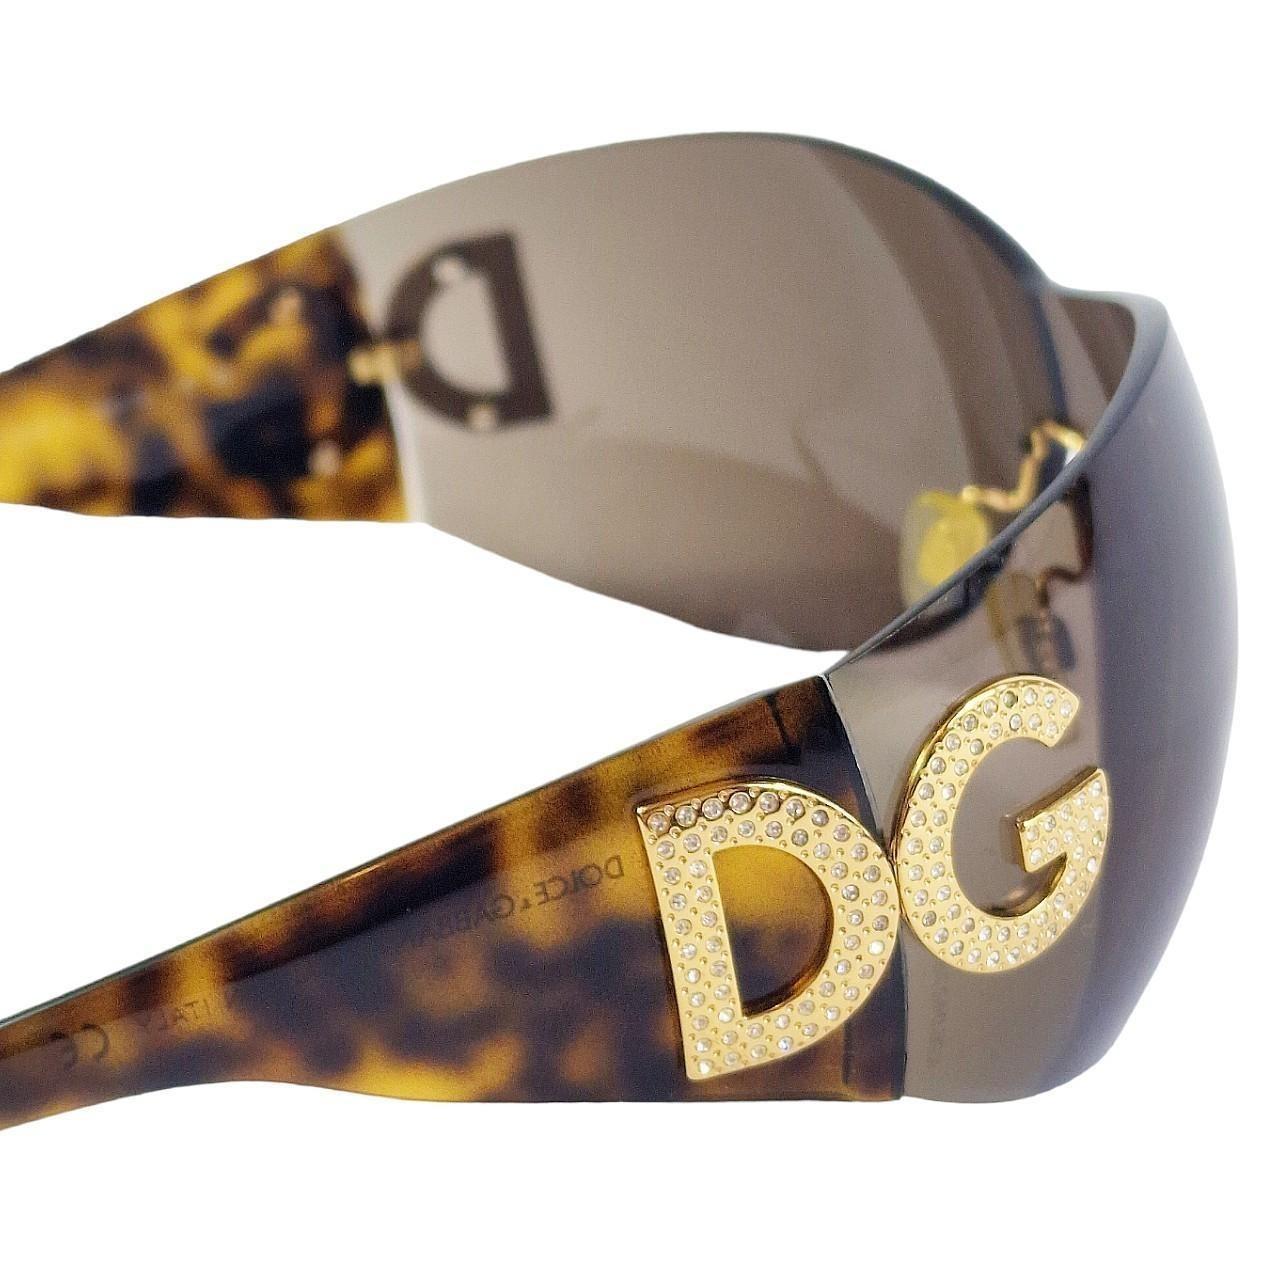 Dolce & Gabbana Men's Brown and Gold Sunglasses - 3